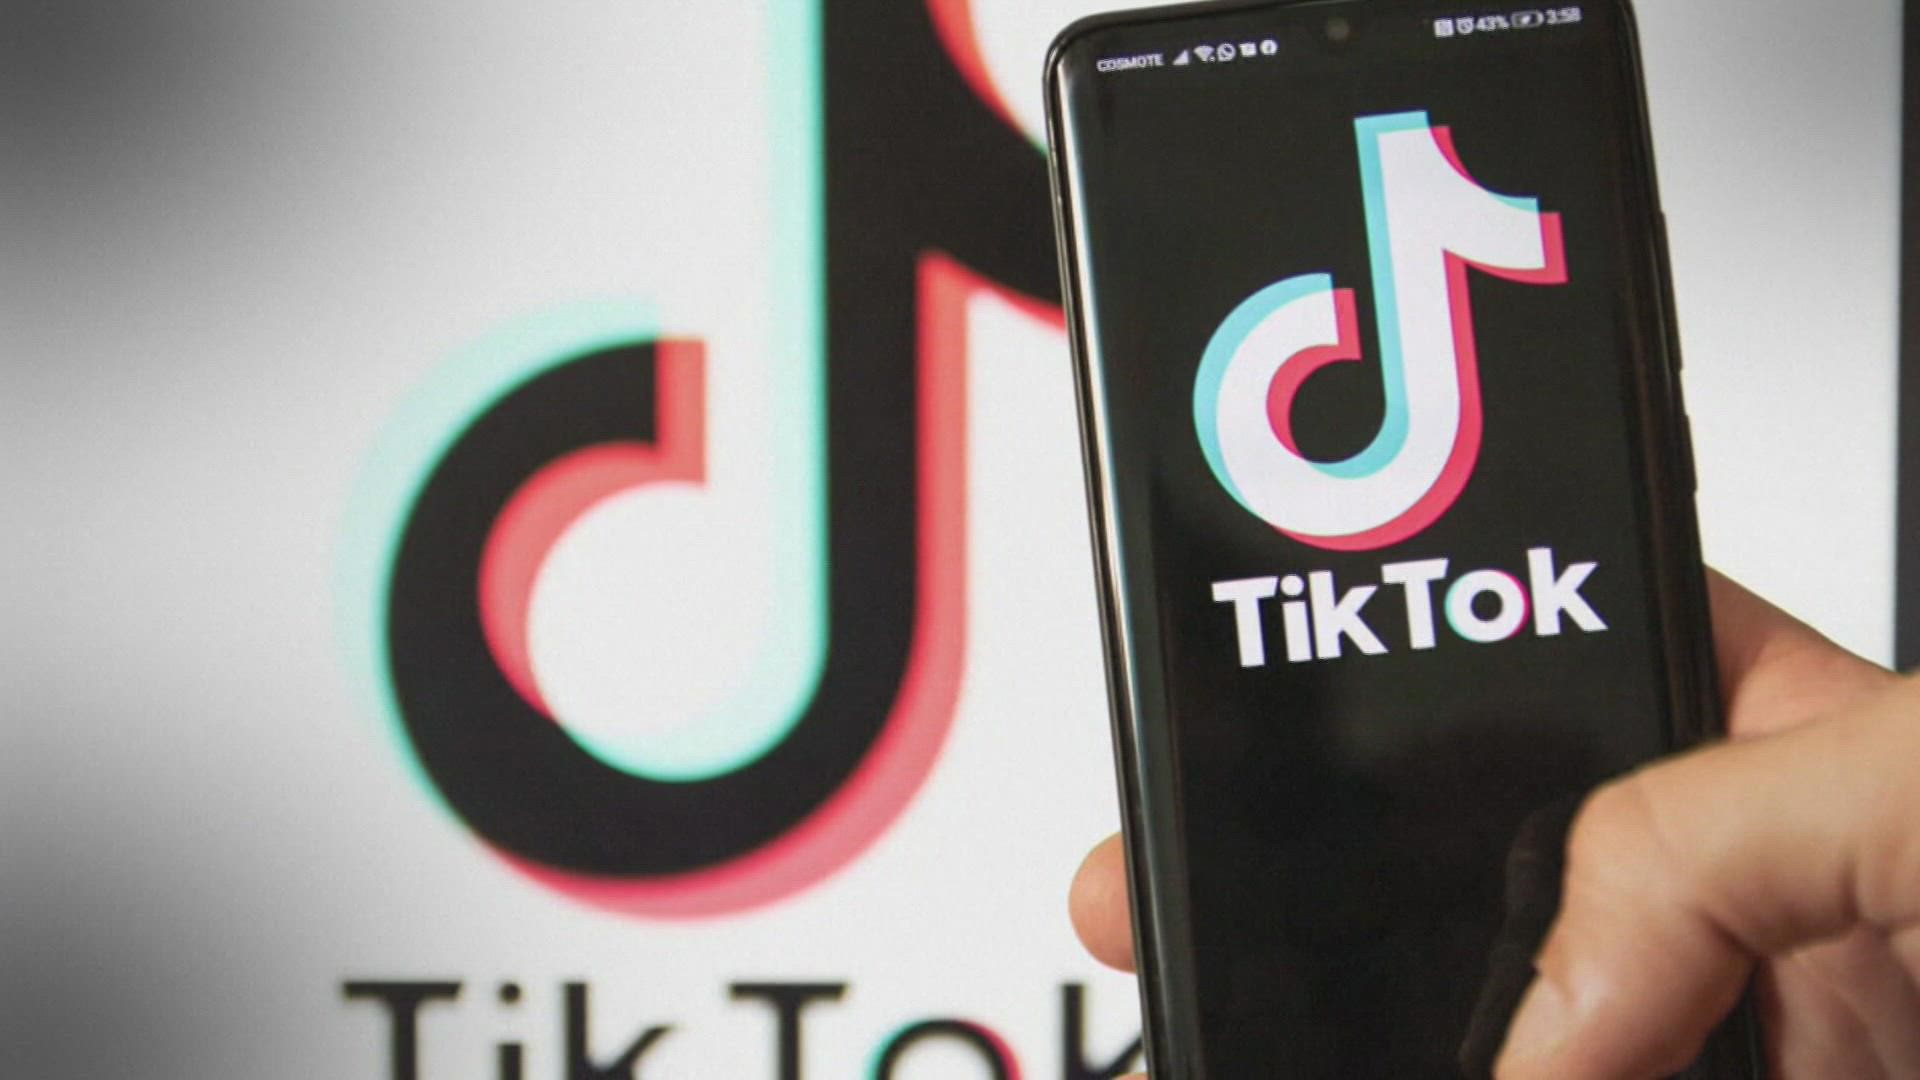 FBI Director Chris Wray said TikTok, which is owned by a Chinese company, is "in the hands of a government that doesn’t share our values."